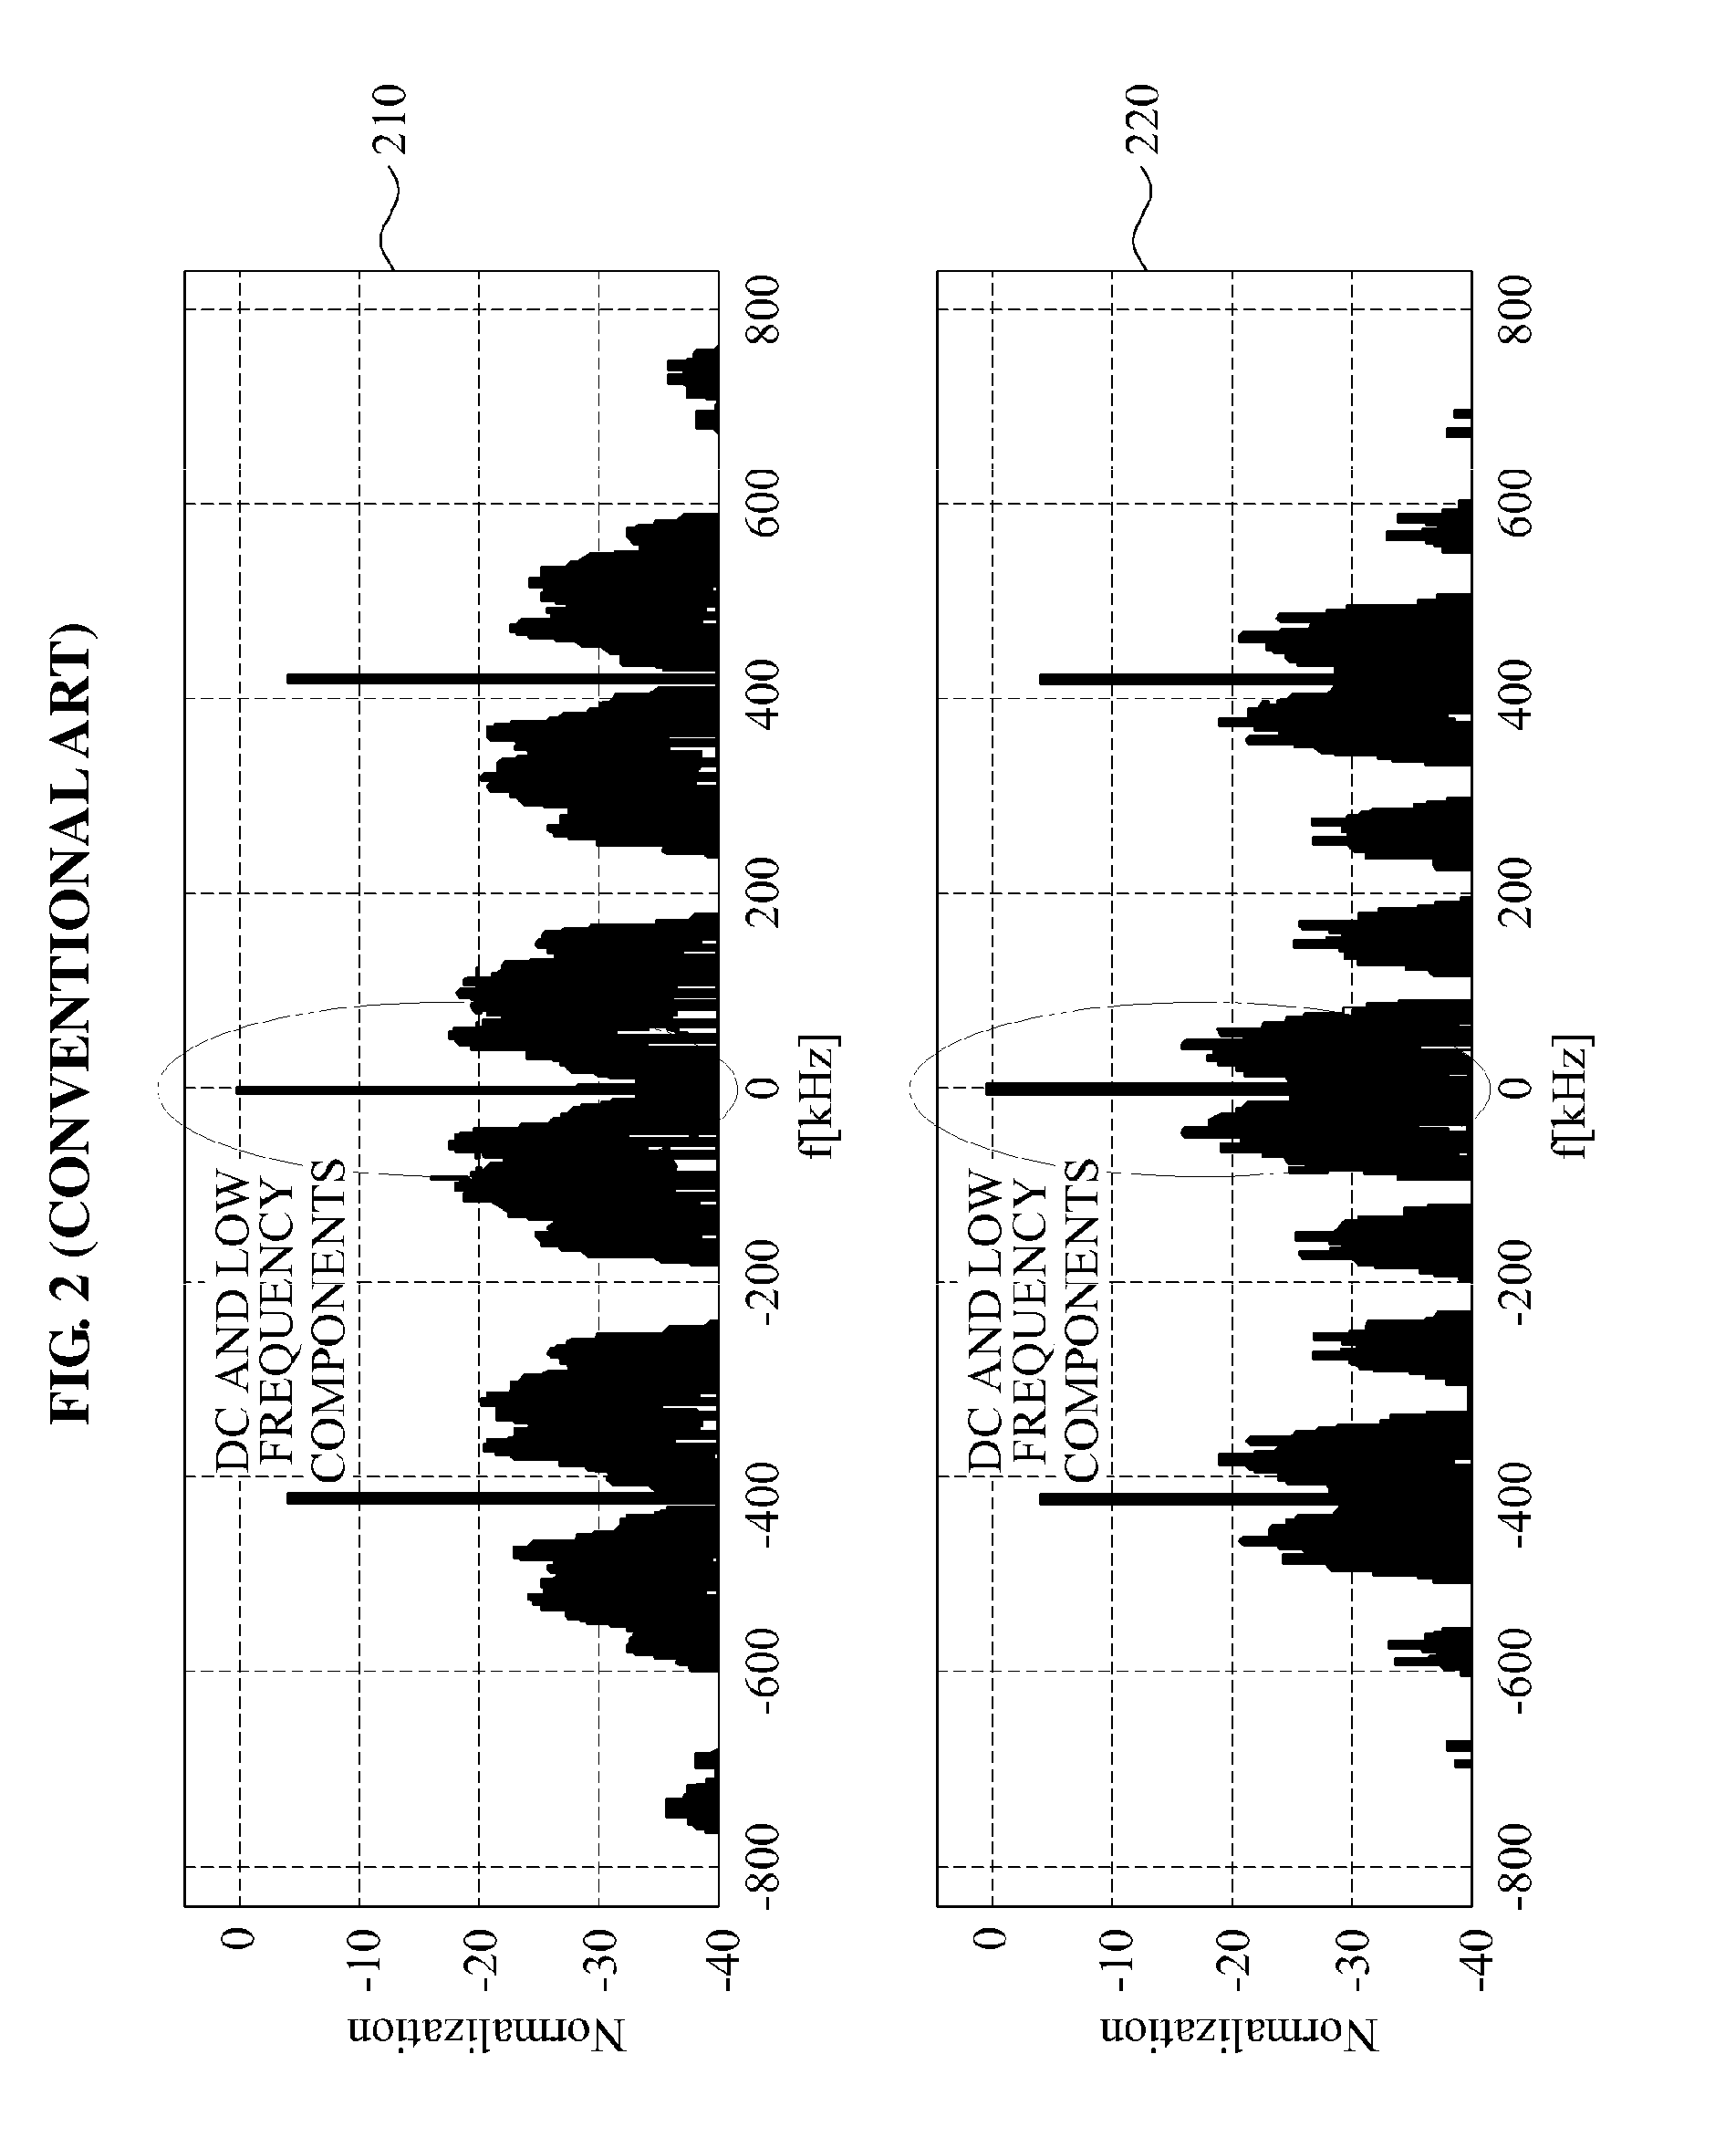 Method and apparatus for passive radio frequency indentification (RFID) reader digital demodulation for manchester subcarrier signal